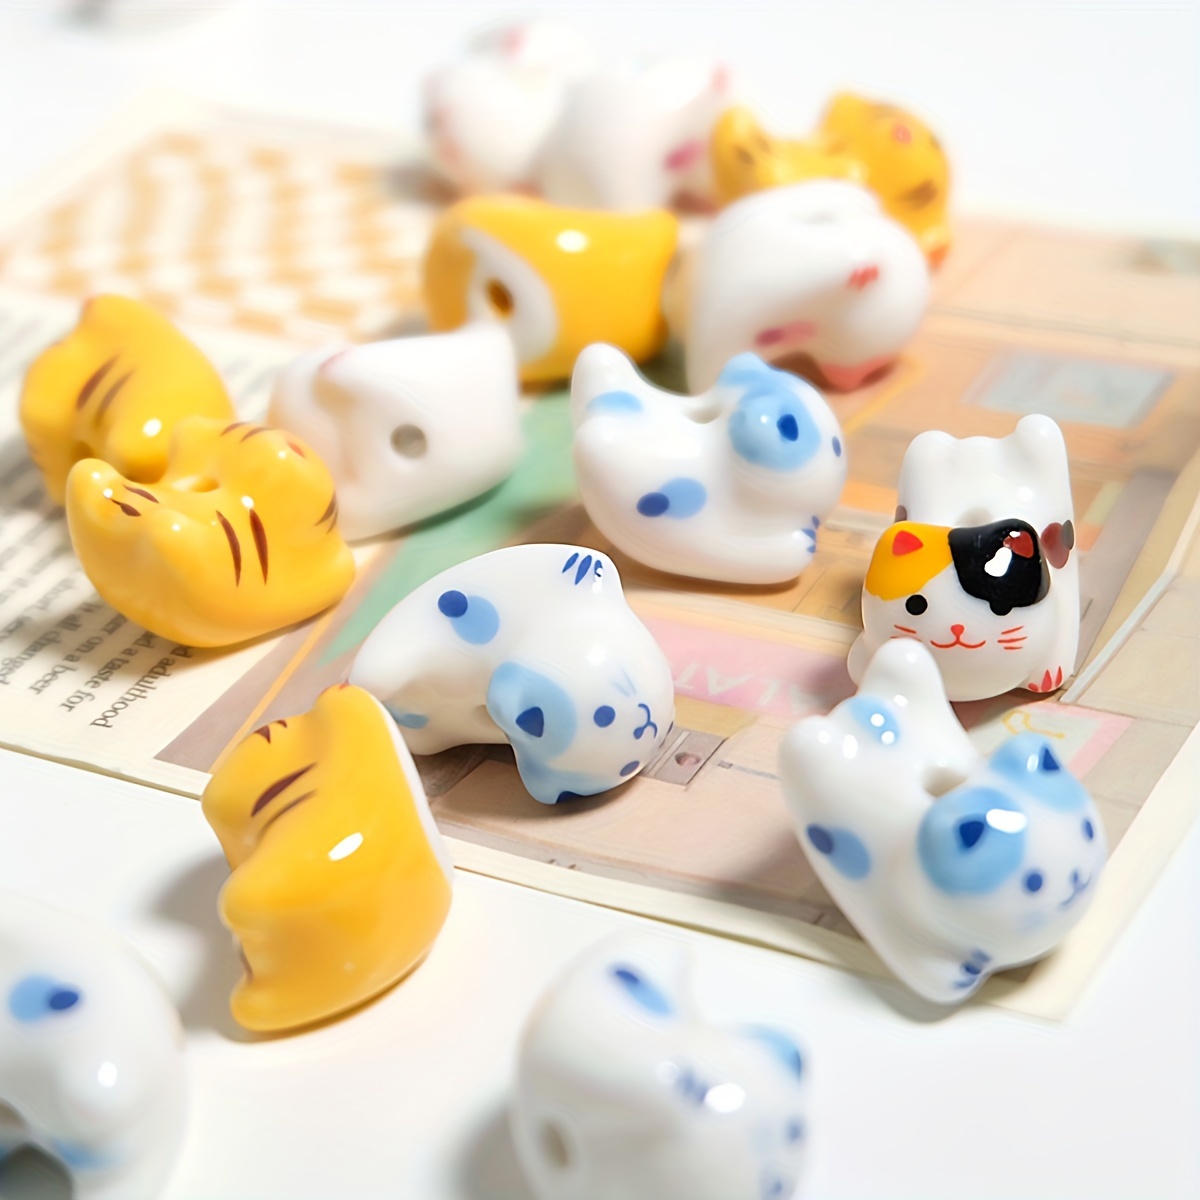 

4-piece Lucky Cat Ceramic Beads 1.5x2.1cm - Vertical Hole For Diy Jewelry Making, Perfect For Bracelets, Earrings & Necklaces